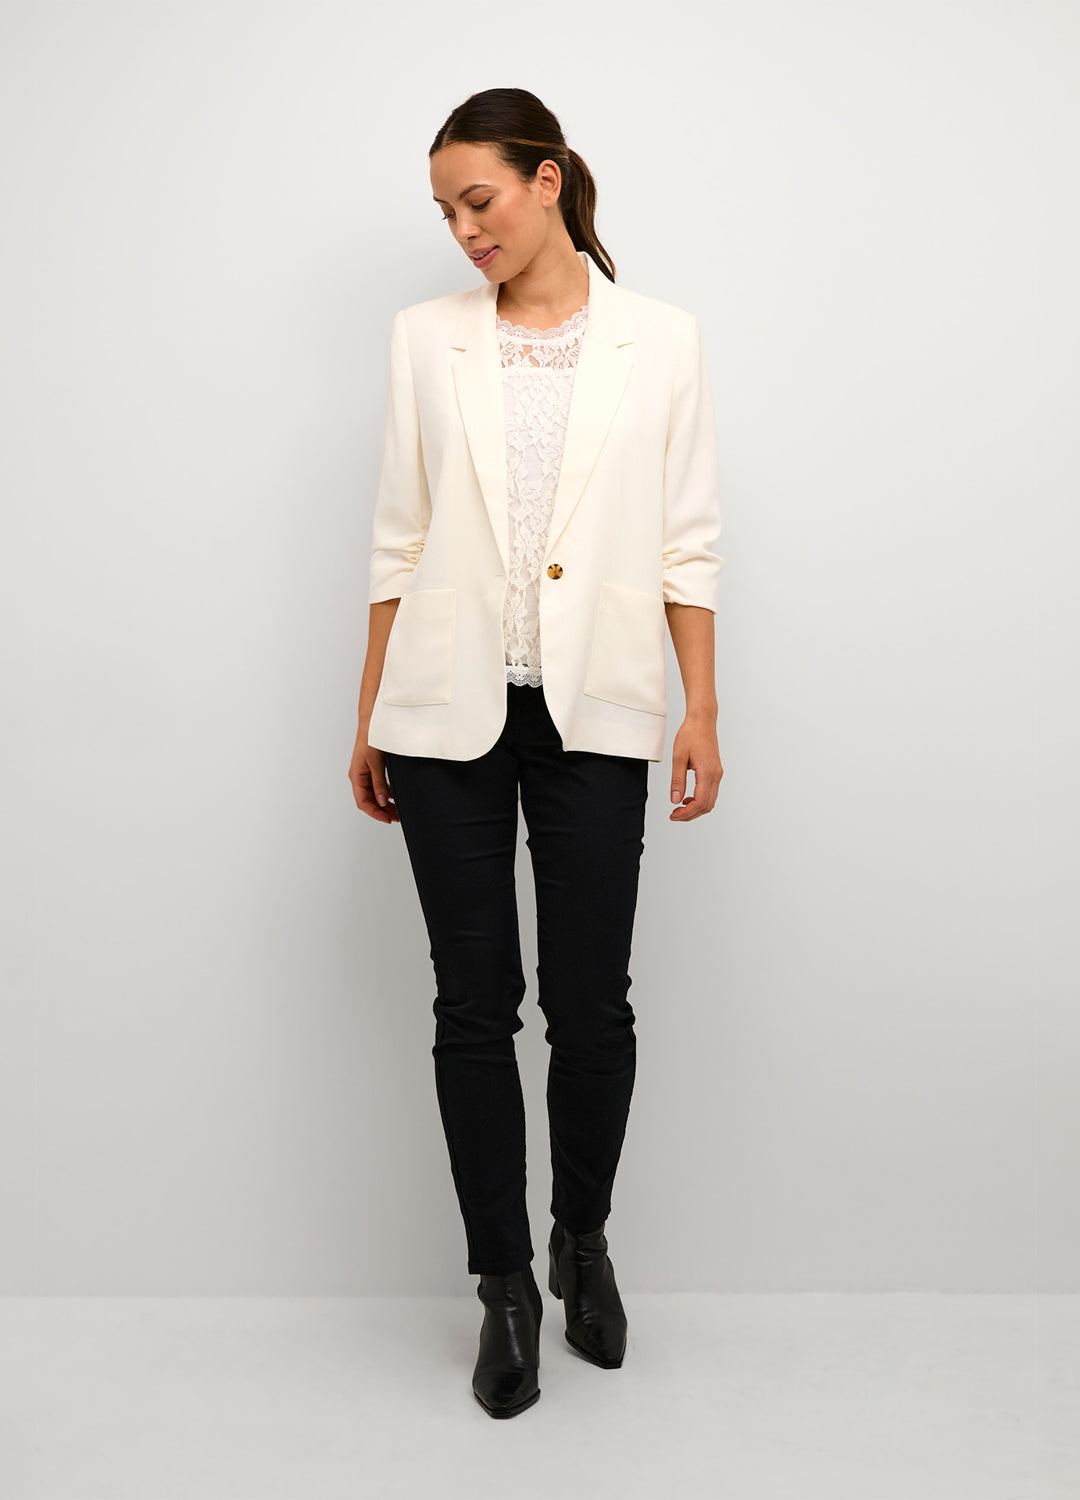 Full outfit look idea for the Cream Clothing Cocamia Blazer in Snow White at Inner Beach Co, Toronto, Ontario, Canada